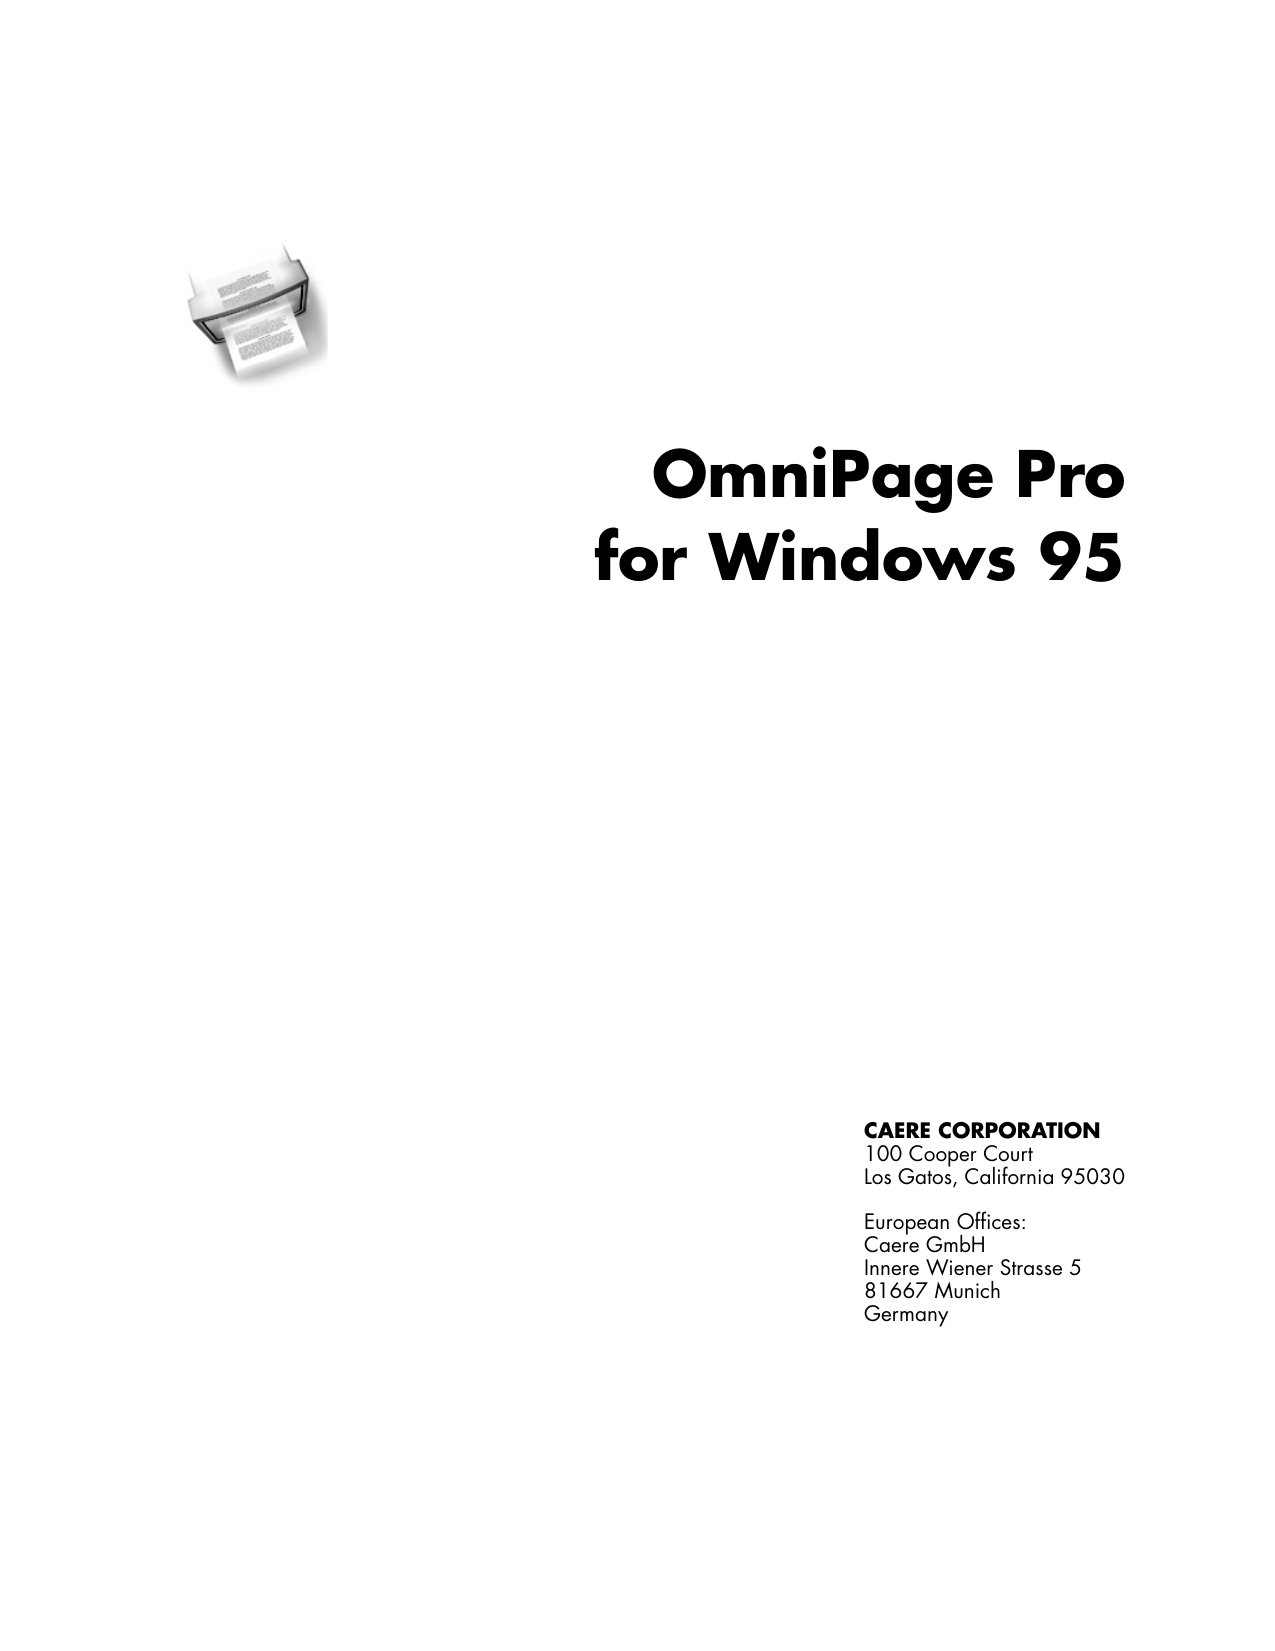 omnipage pro 7.0